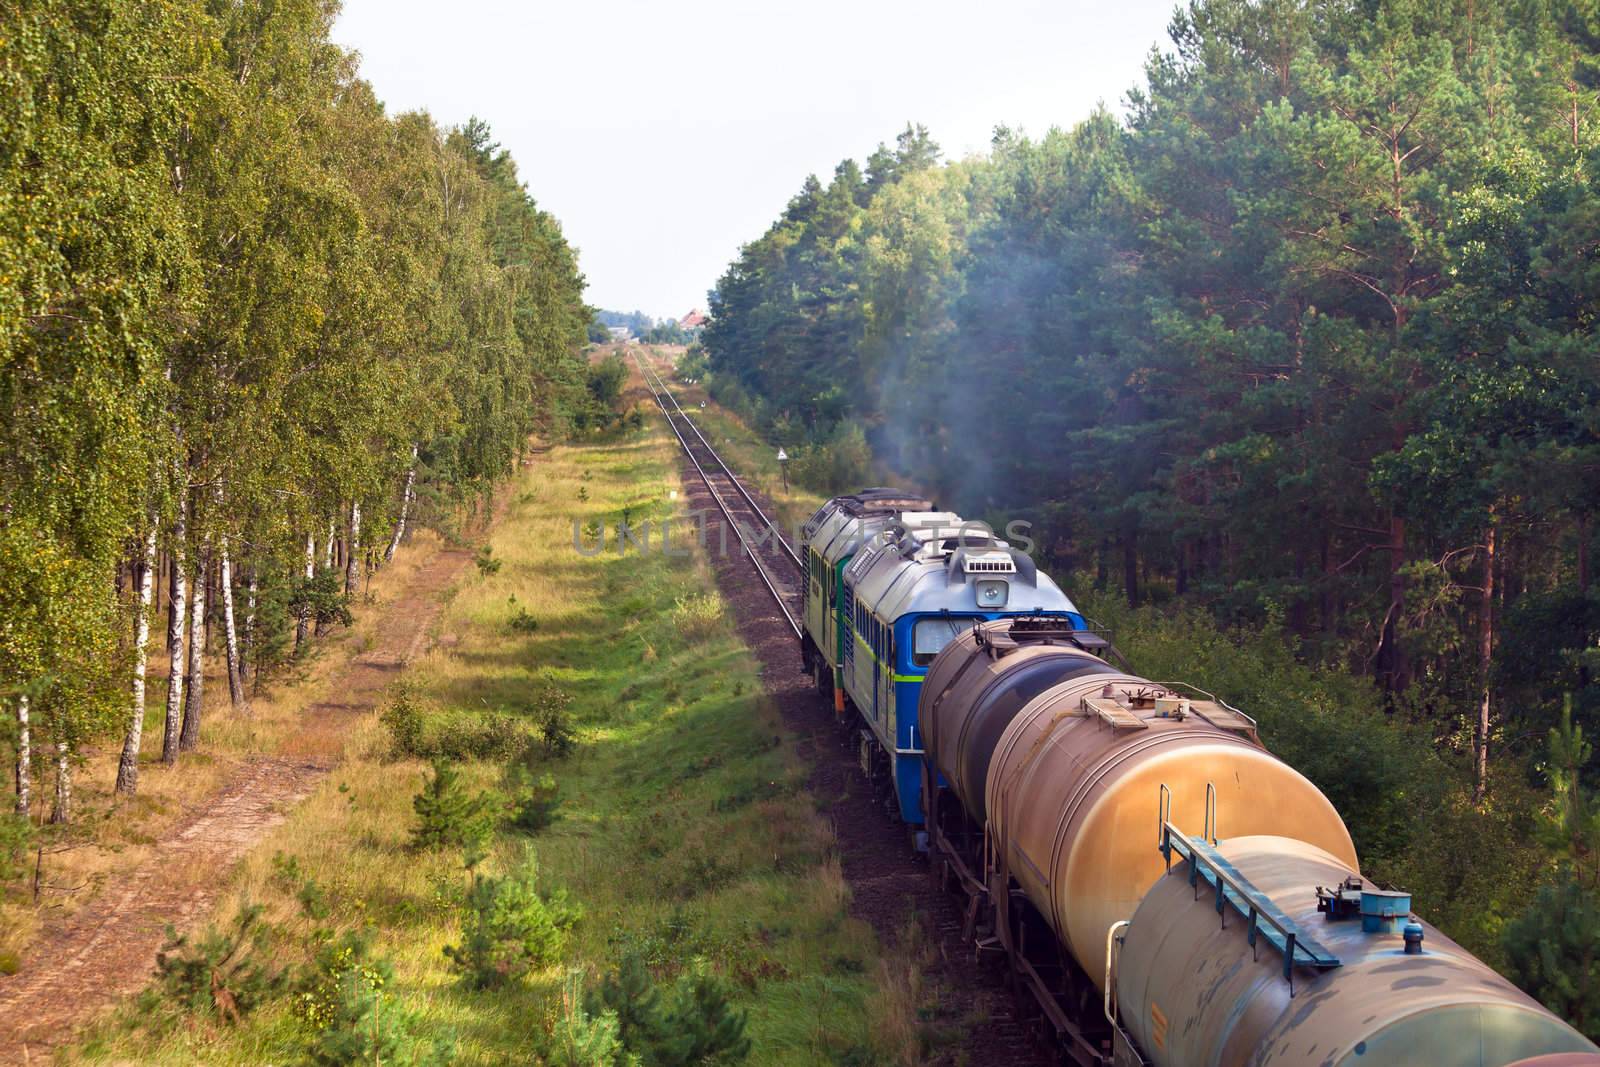 Freight train passing the countryside
